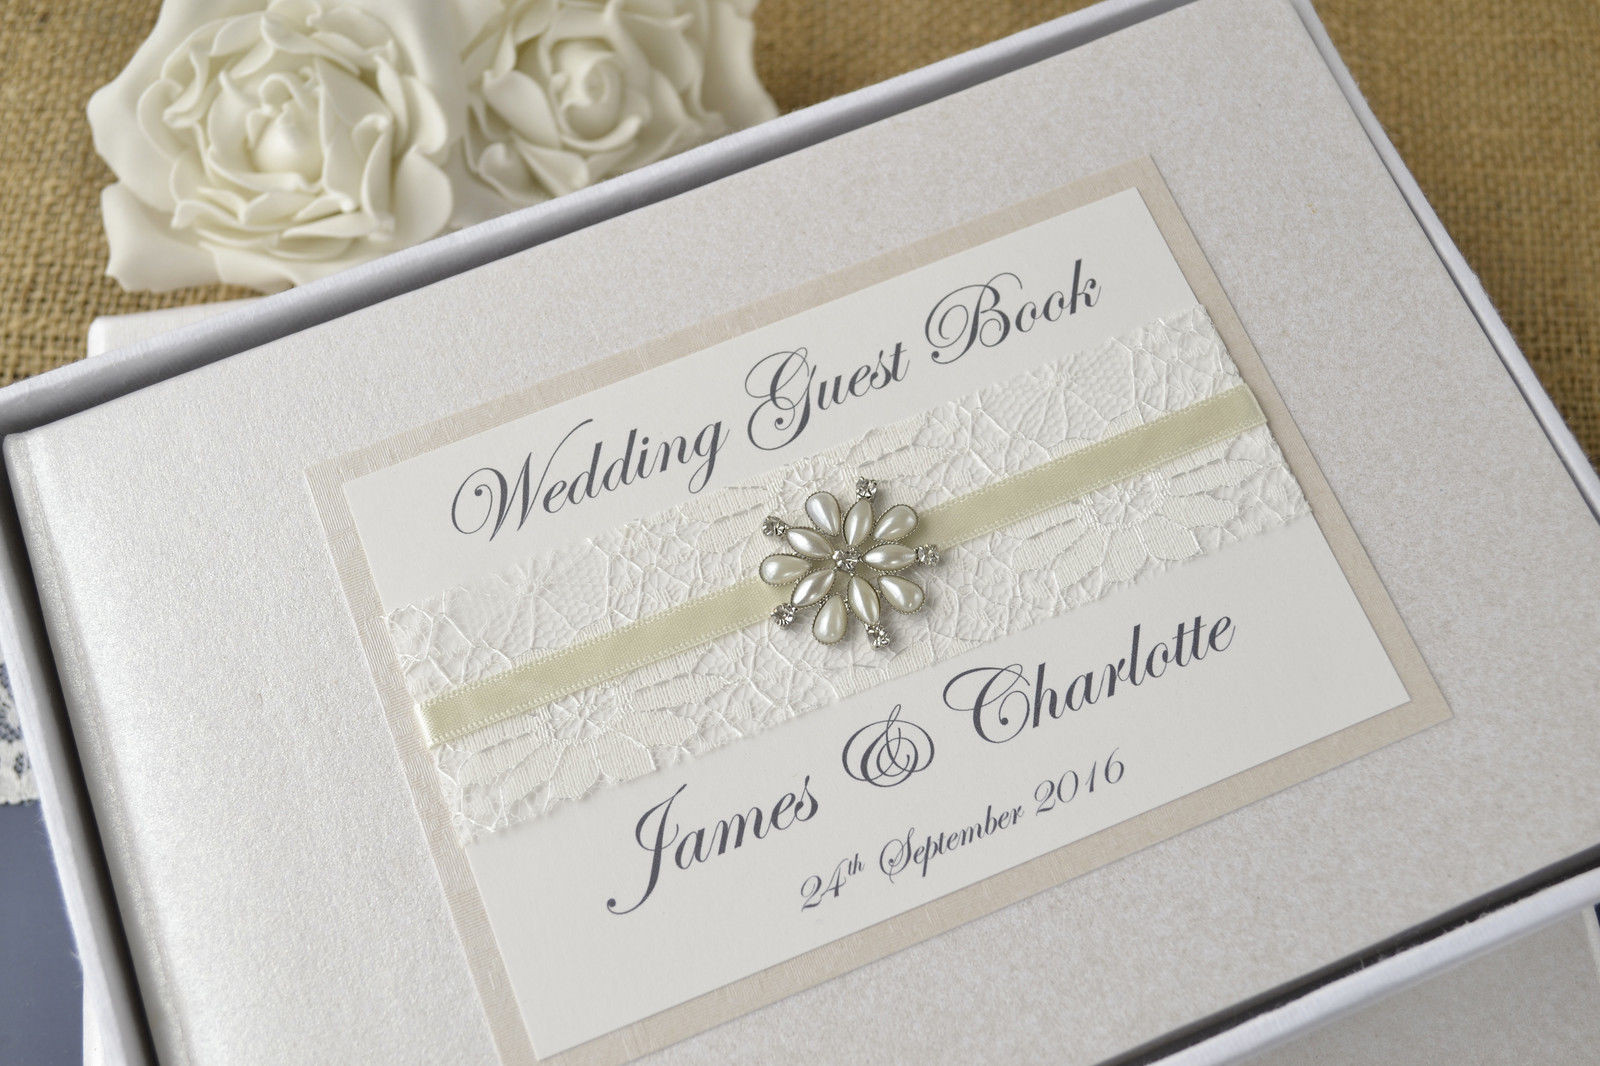 Guest Book Wedding Uk
 Personalised Wedding Guest Book – Vintage lace & jewel